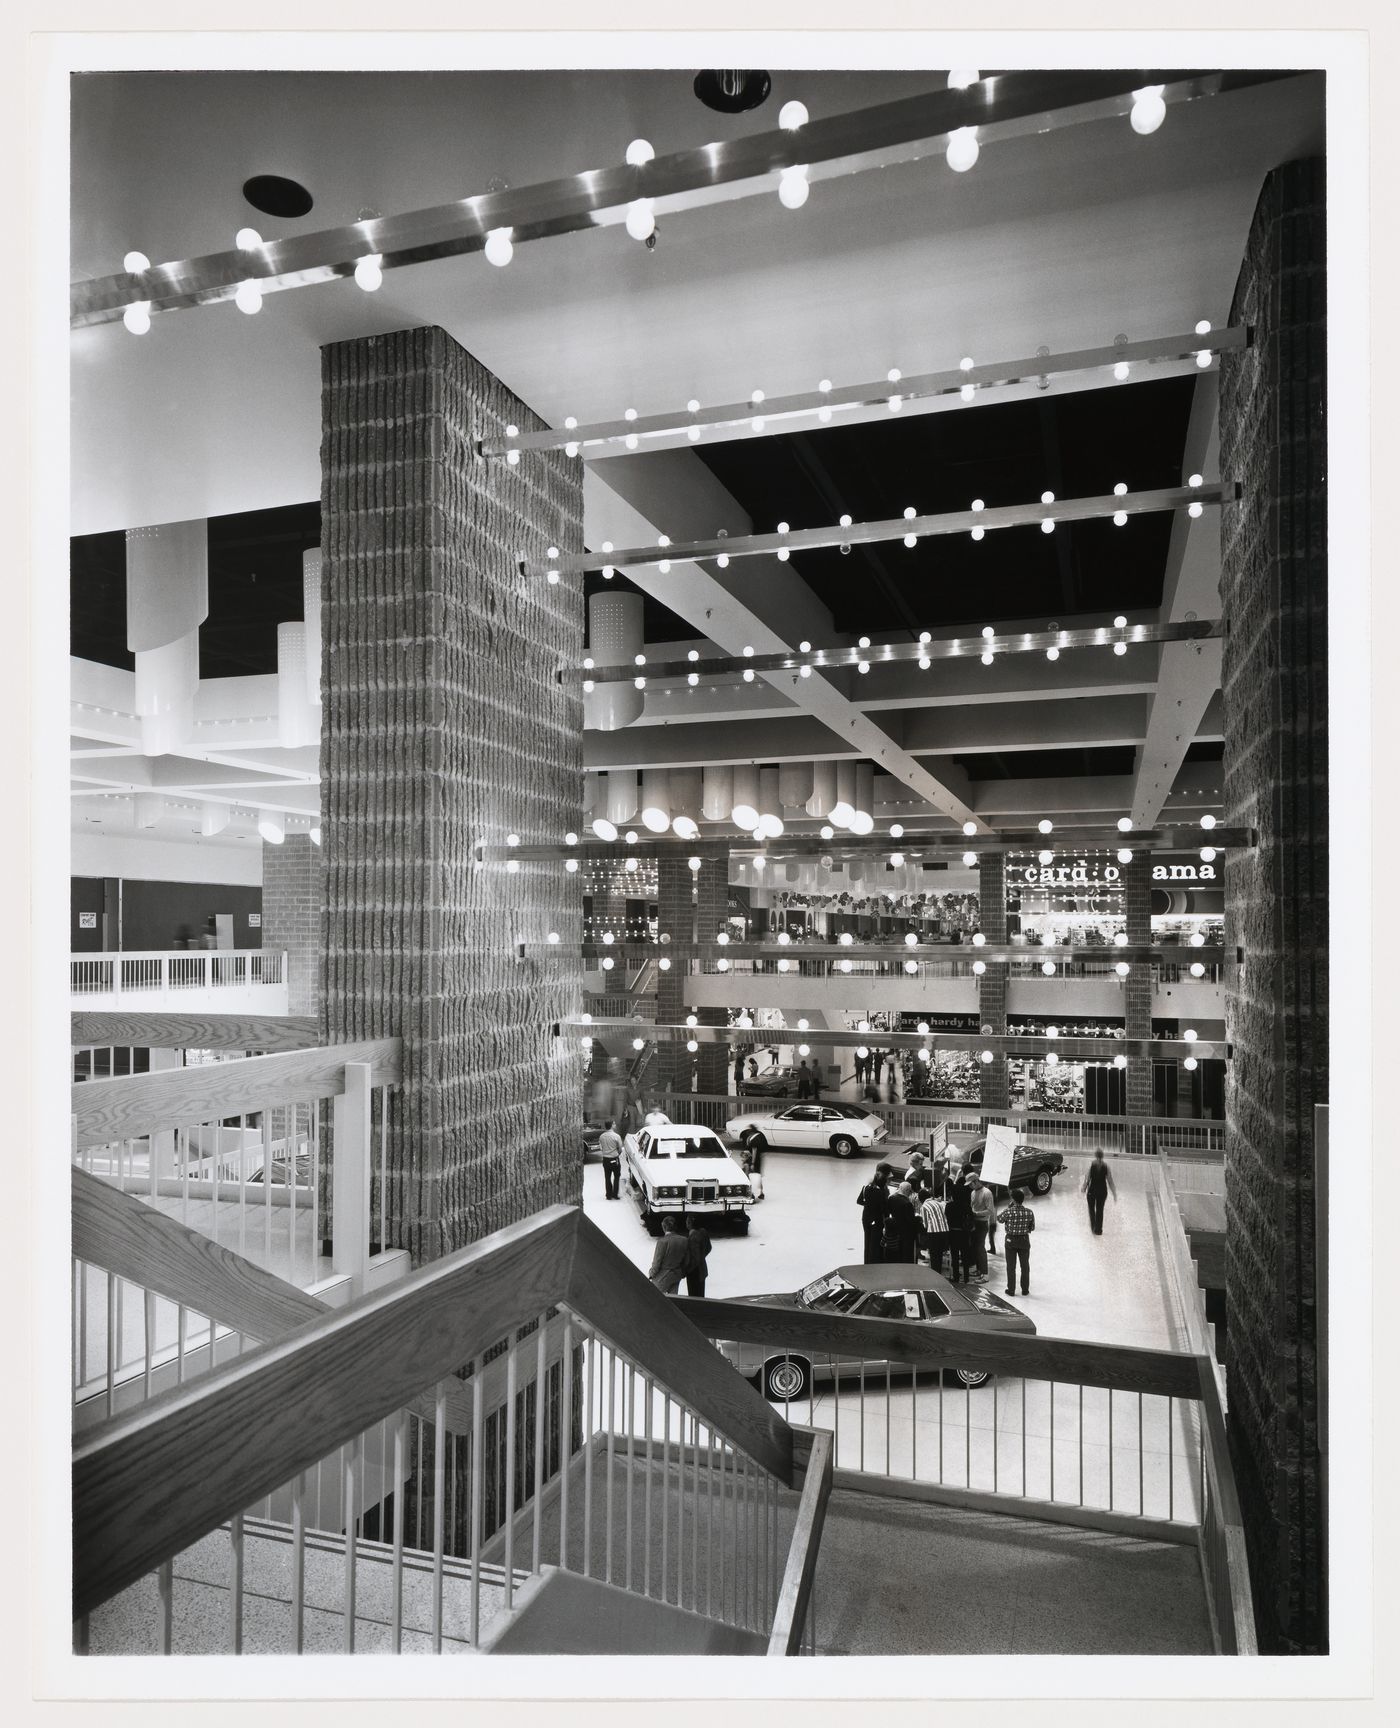 Interior view of the Staten Island Mall from the stairs with a car exposition, Staten Island, New York, United States